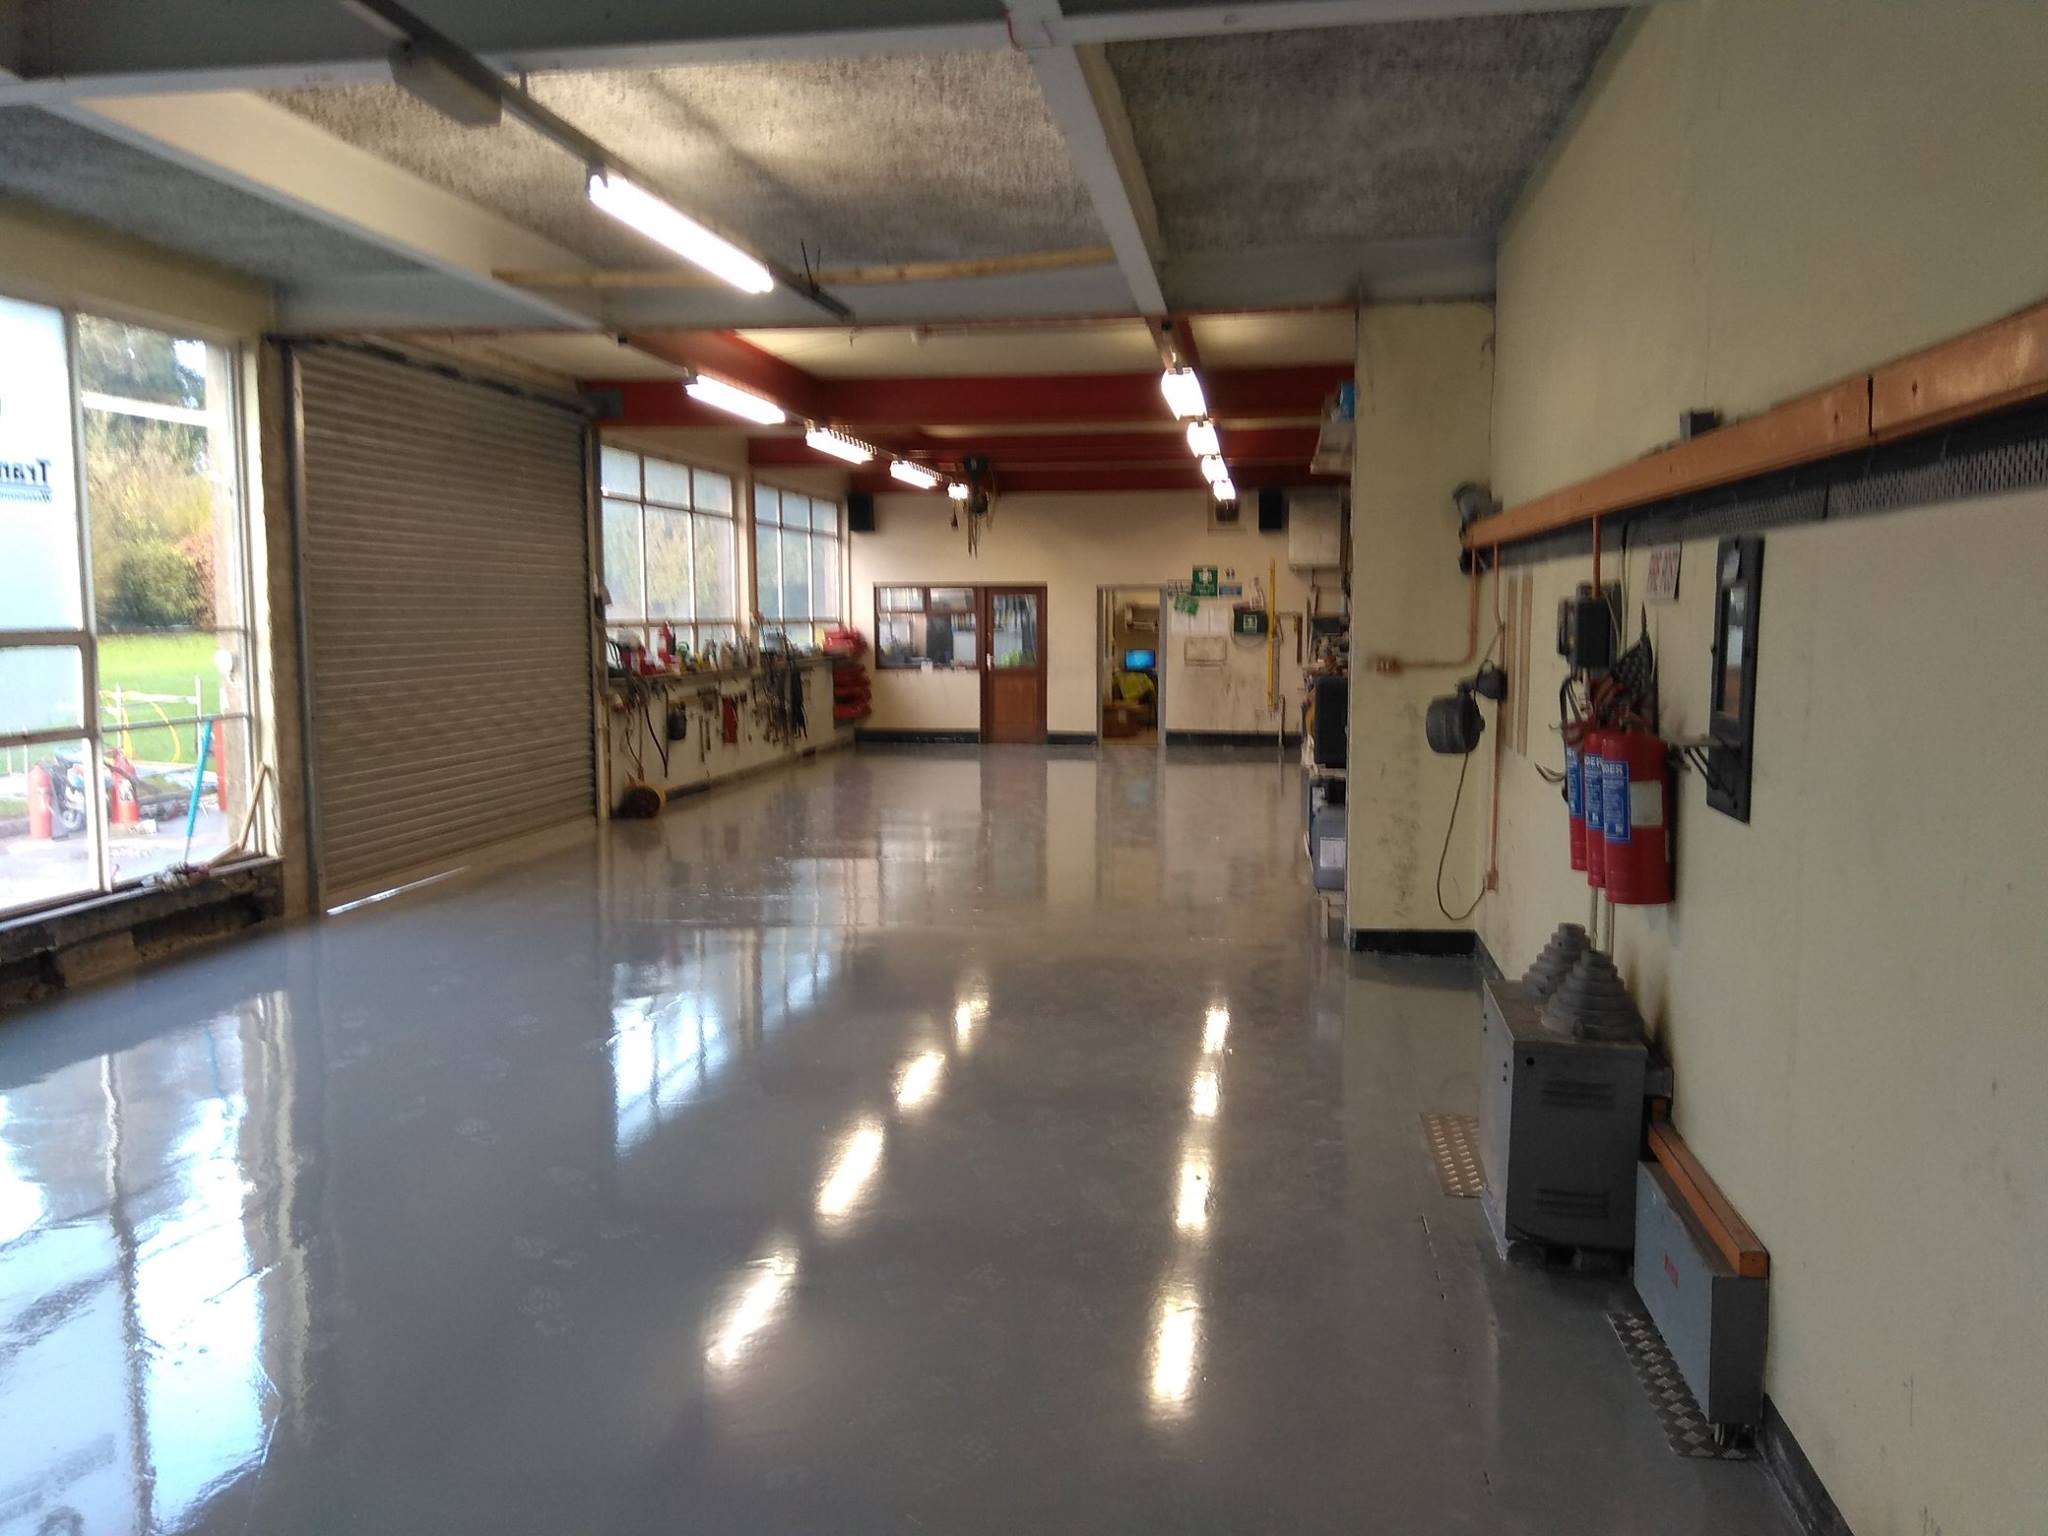 Workshop floor cleaned and painted.